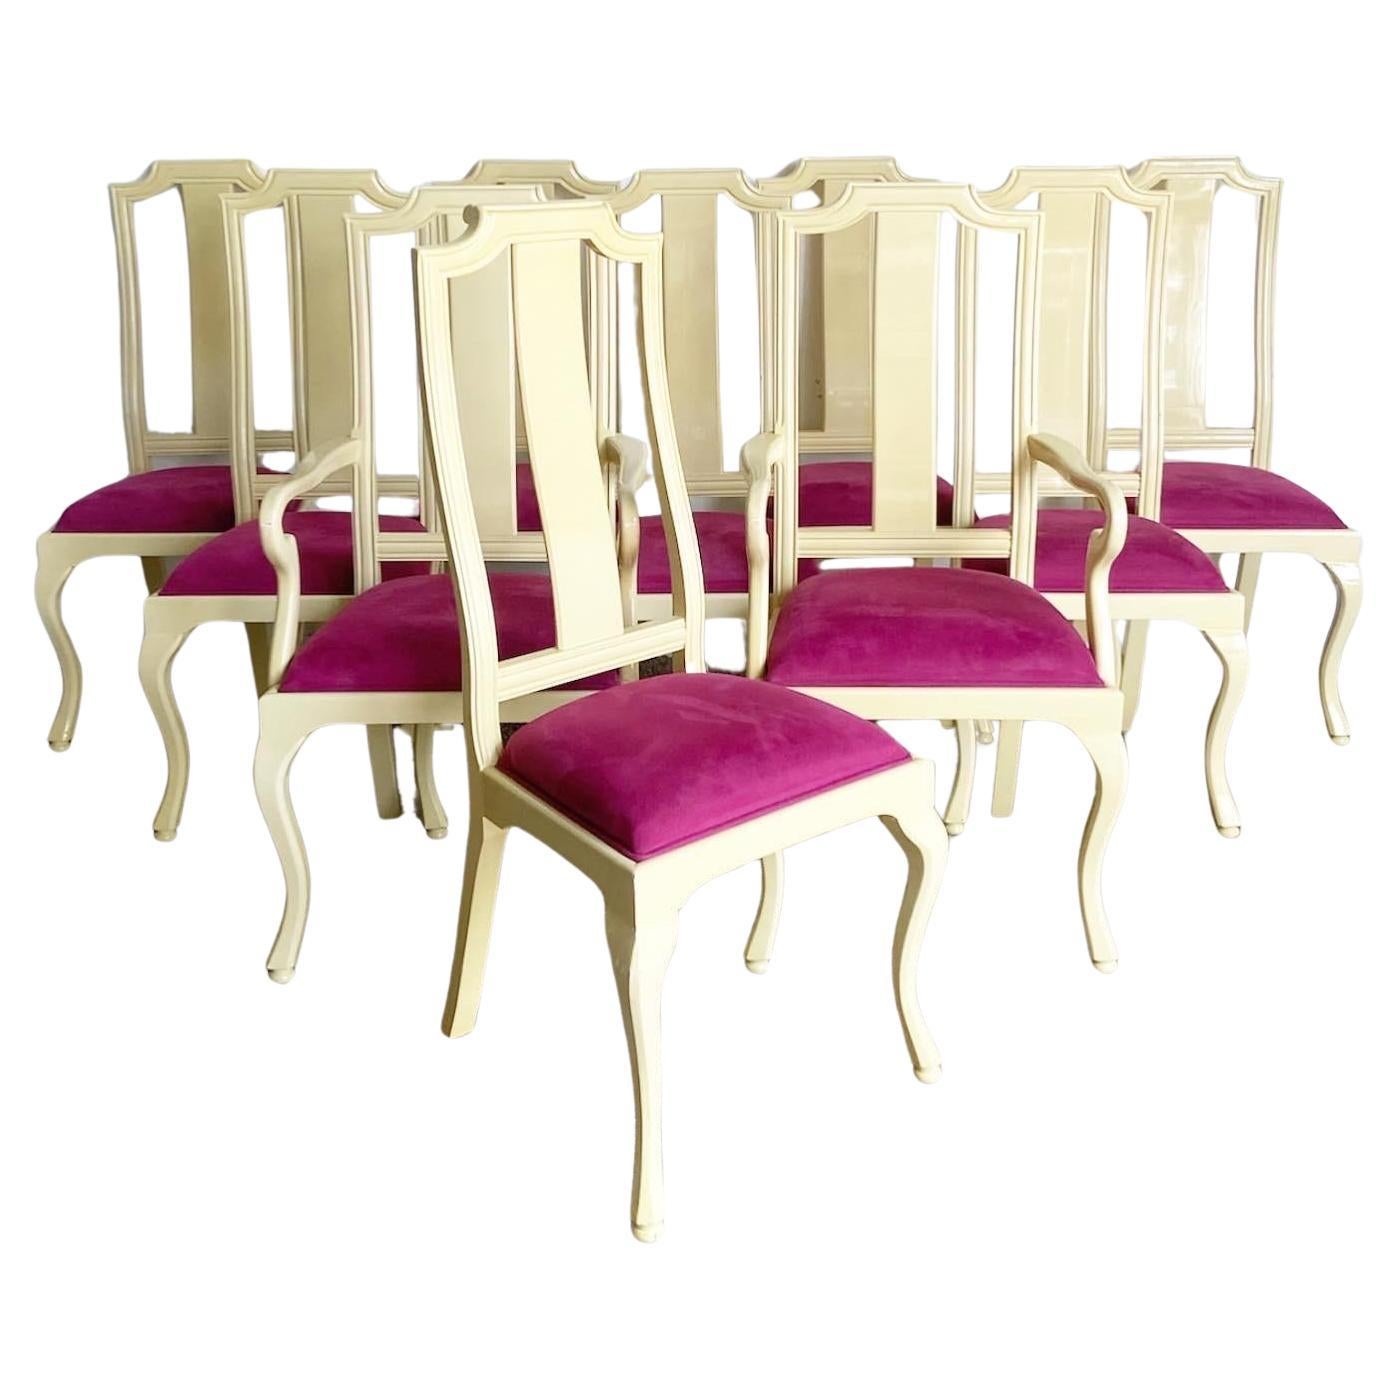 Regency Cream Lacquered and Dark Pink Dining Chairs - Set of 10